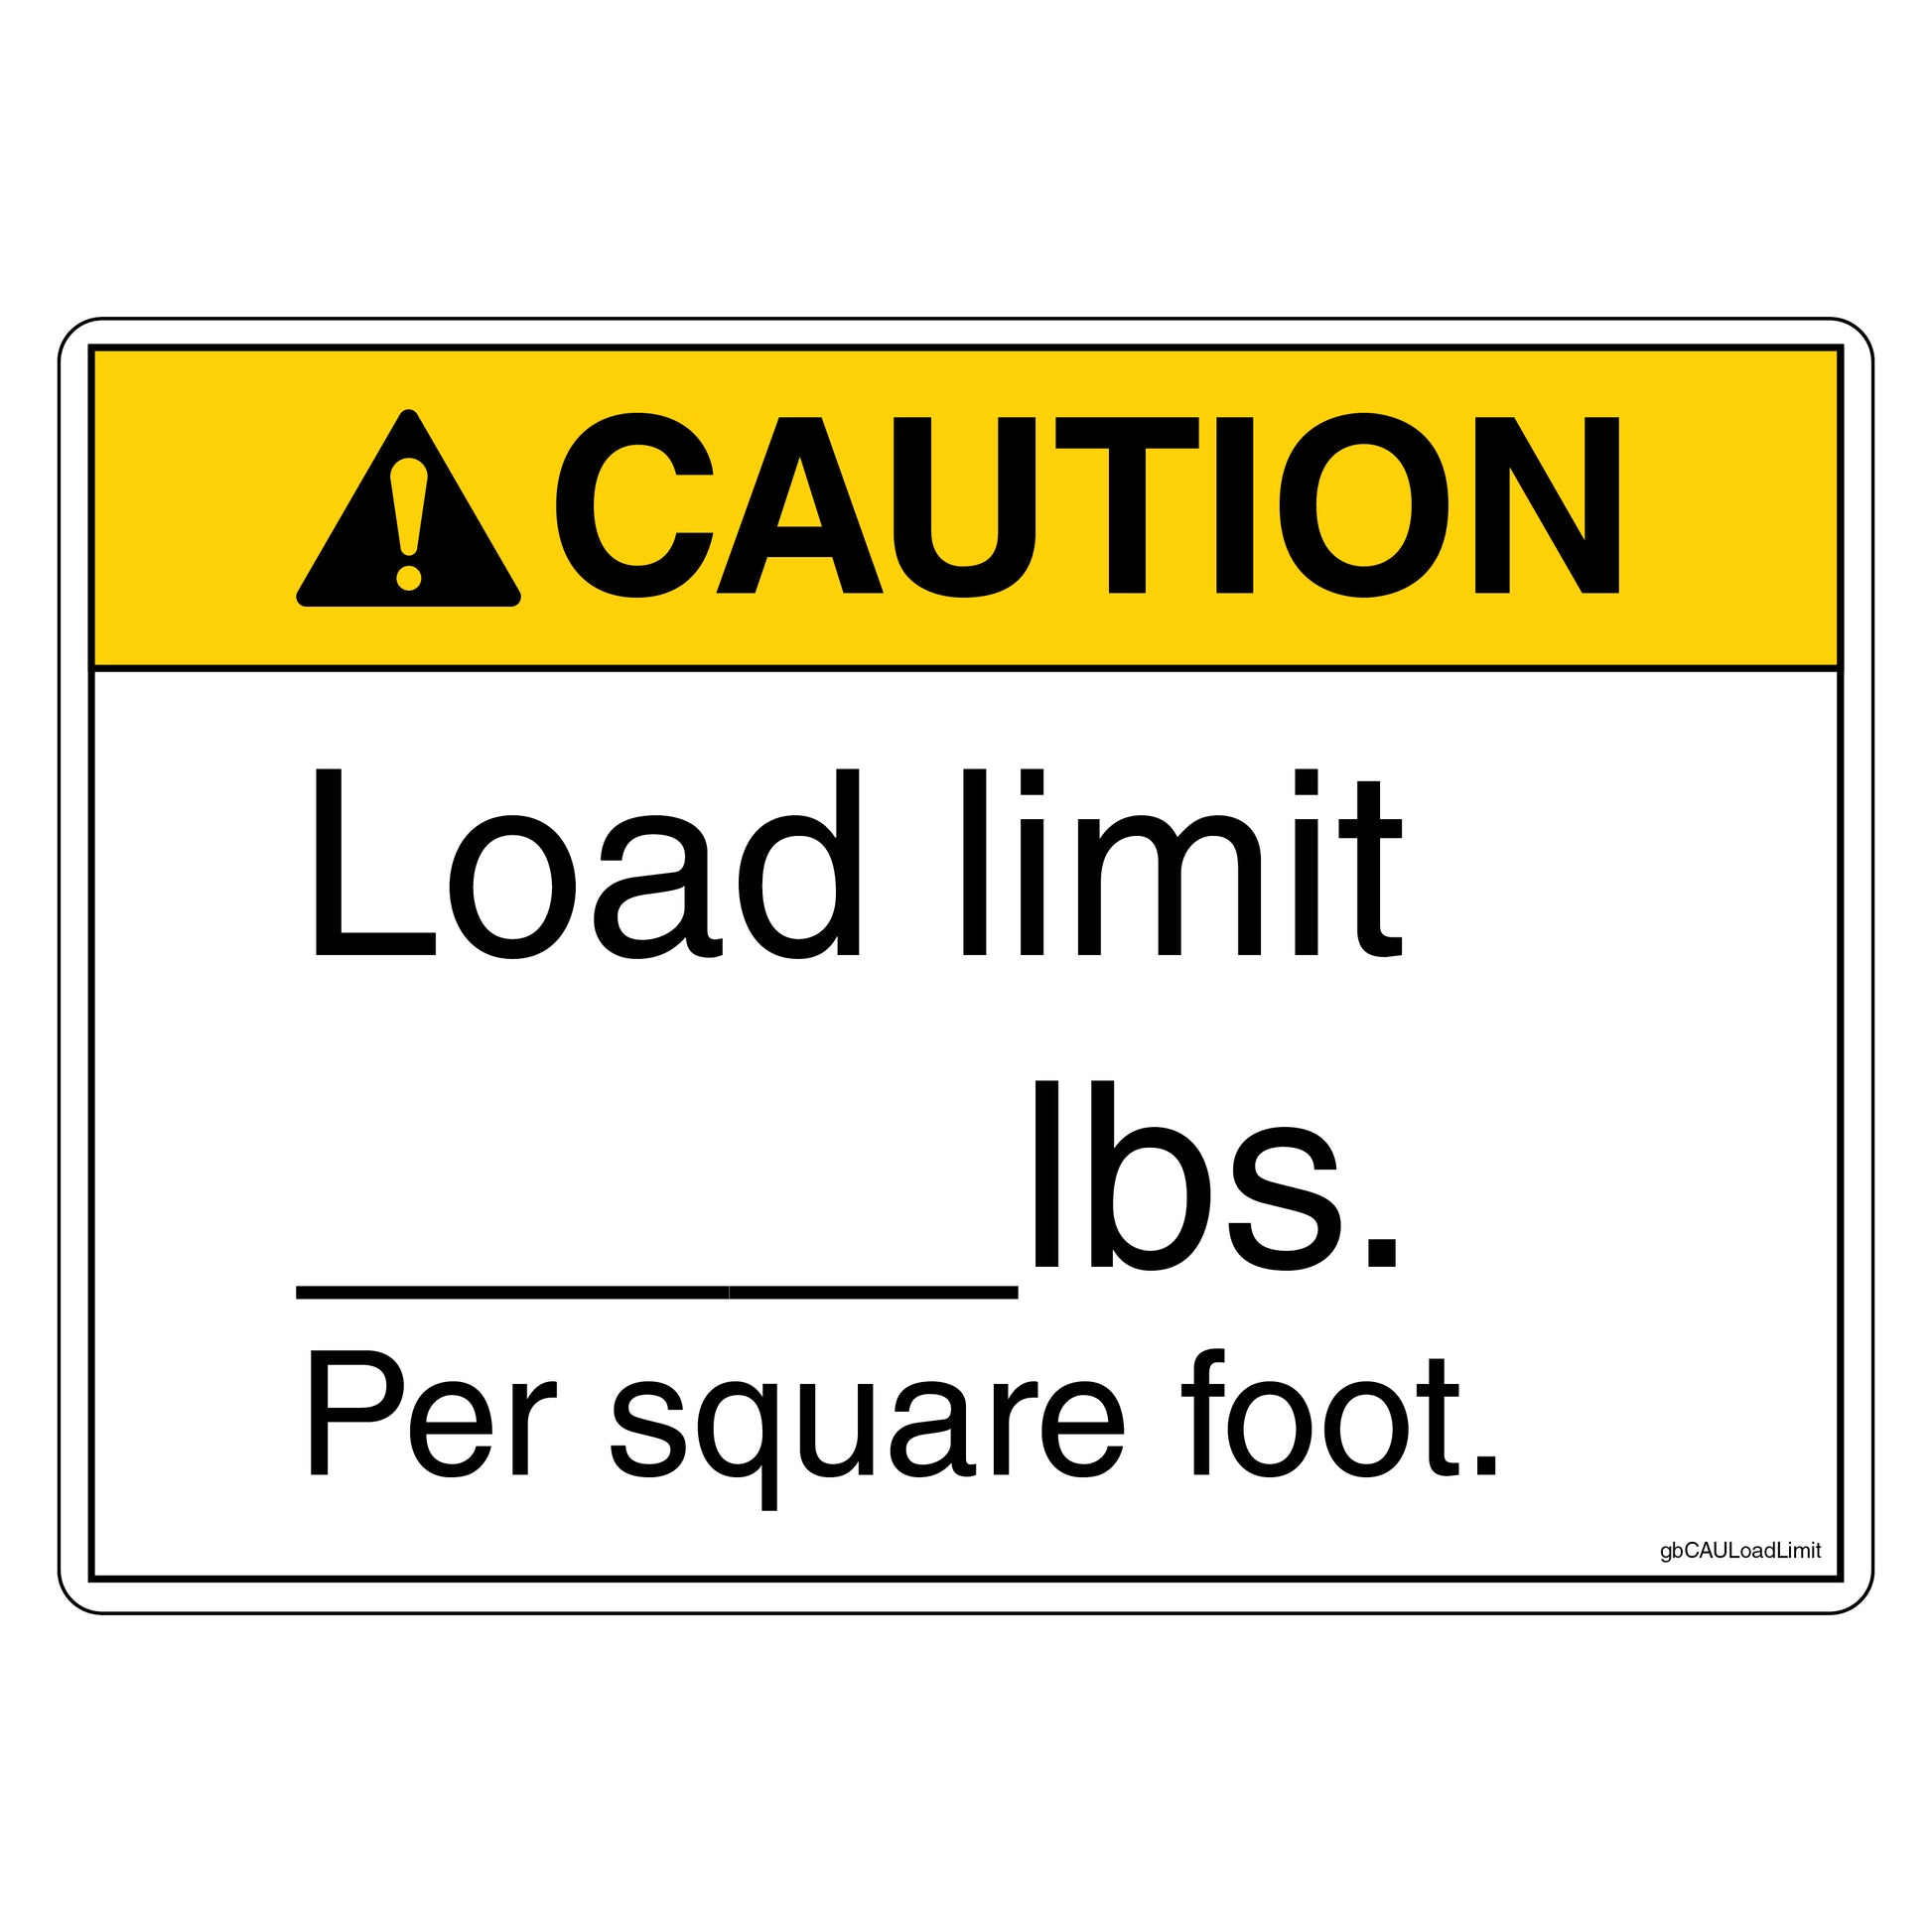 Caution Load Limit Per Square Foot Decal - Blank lbs for Customization. 